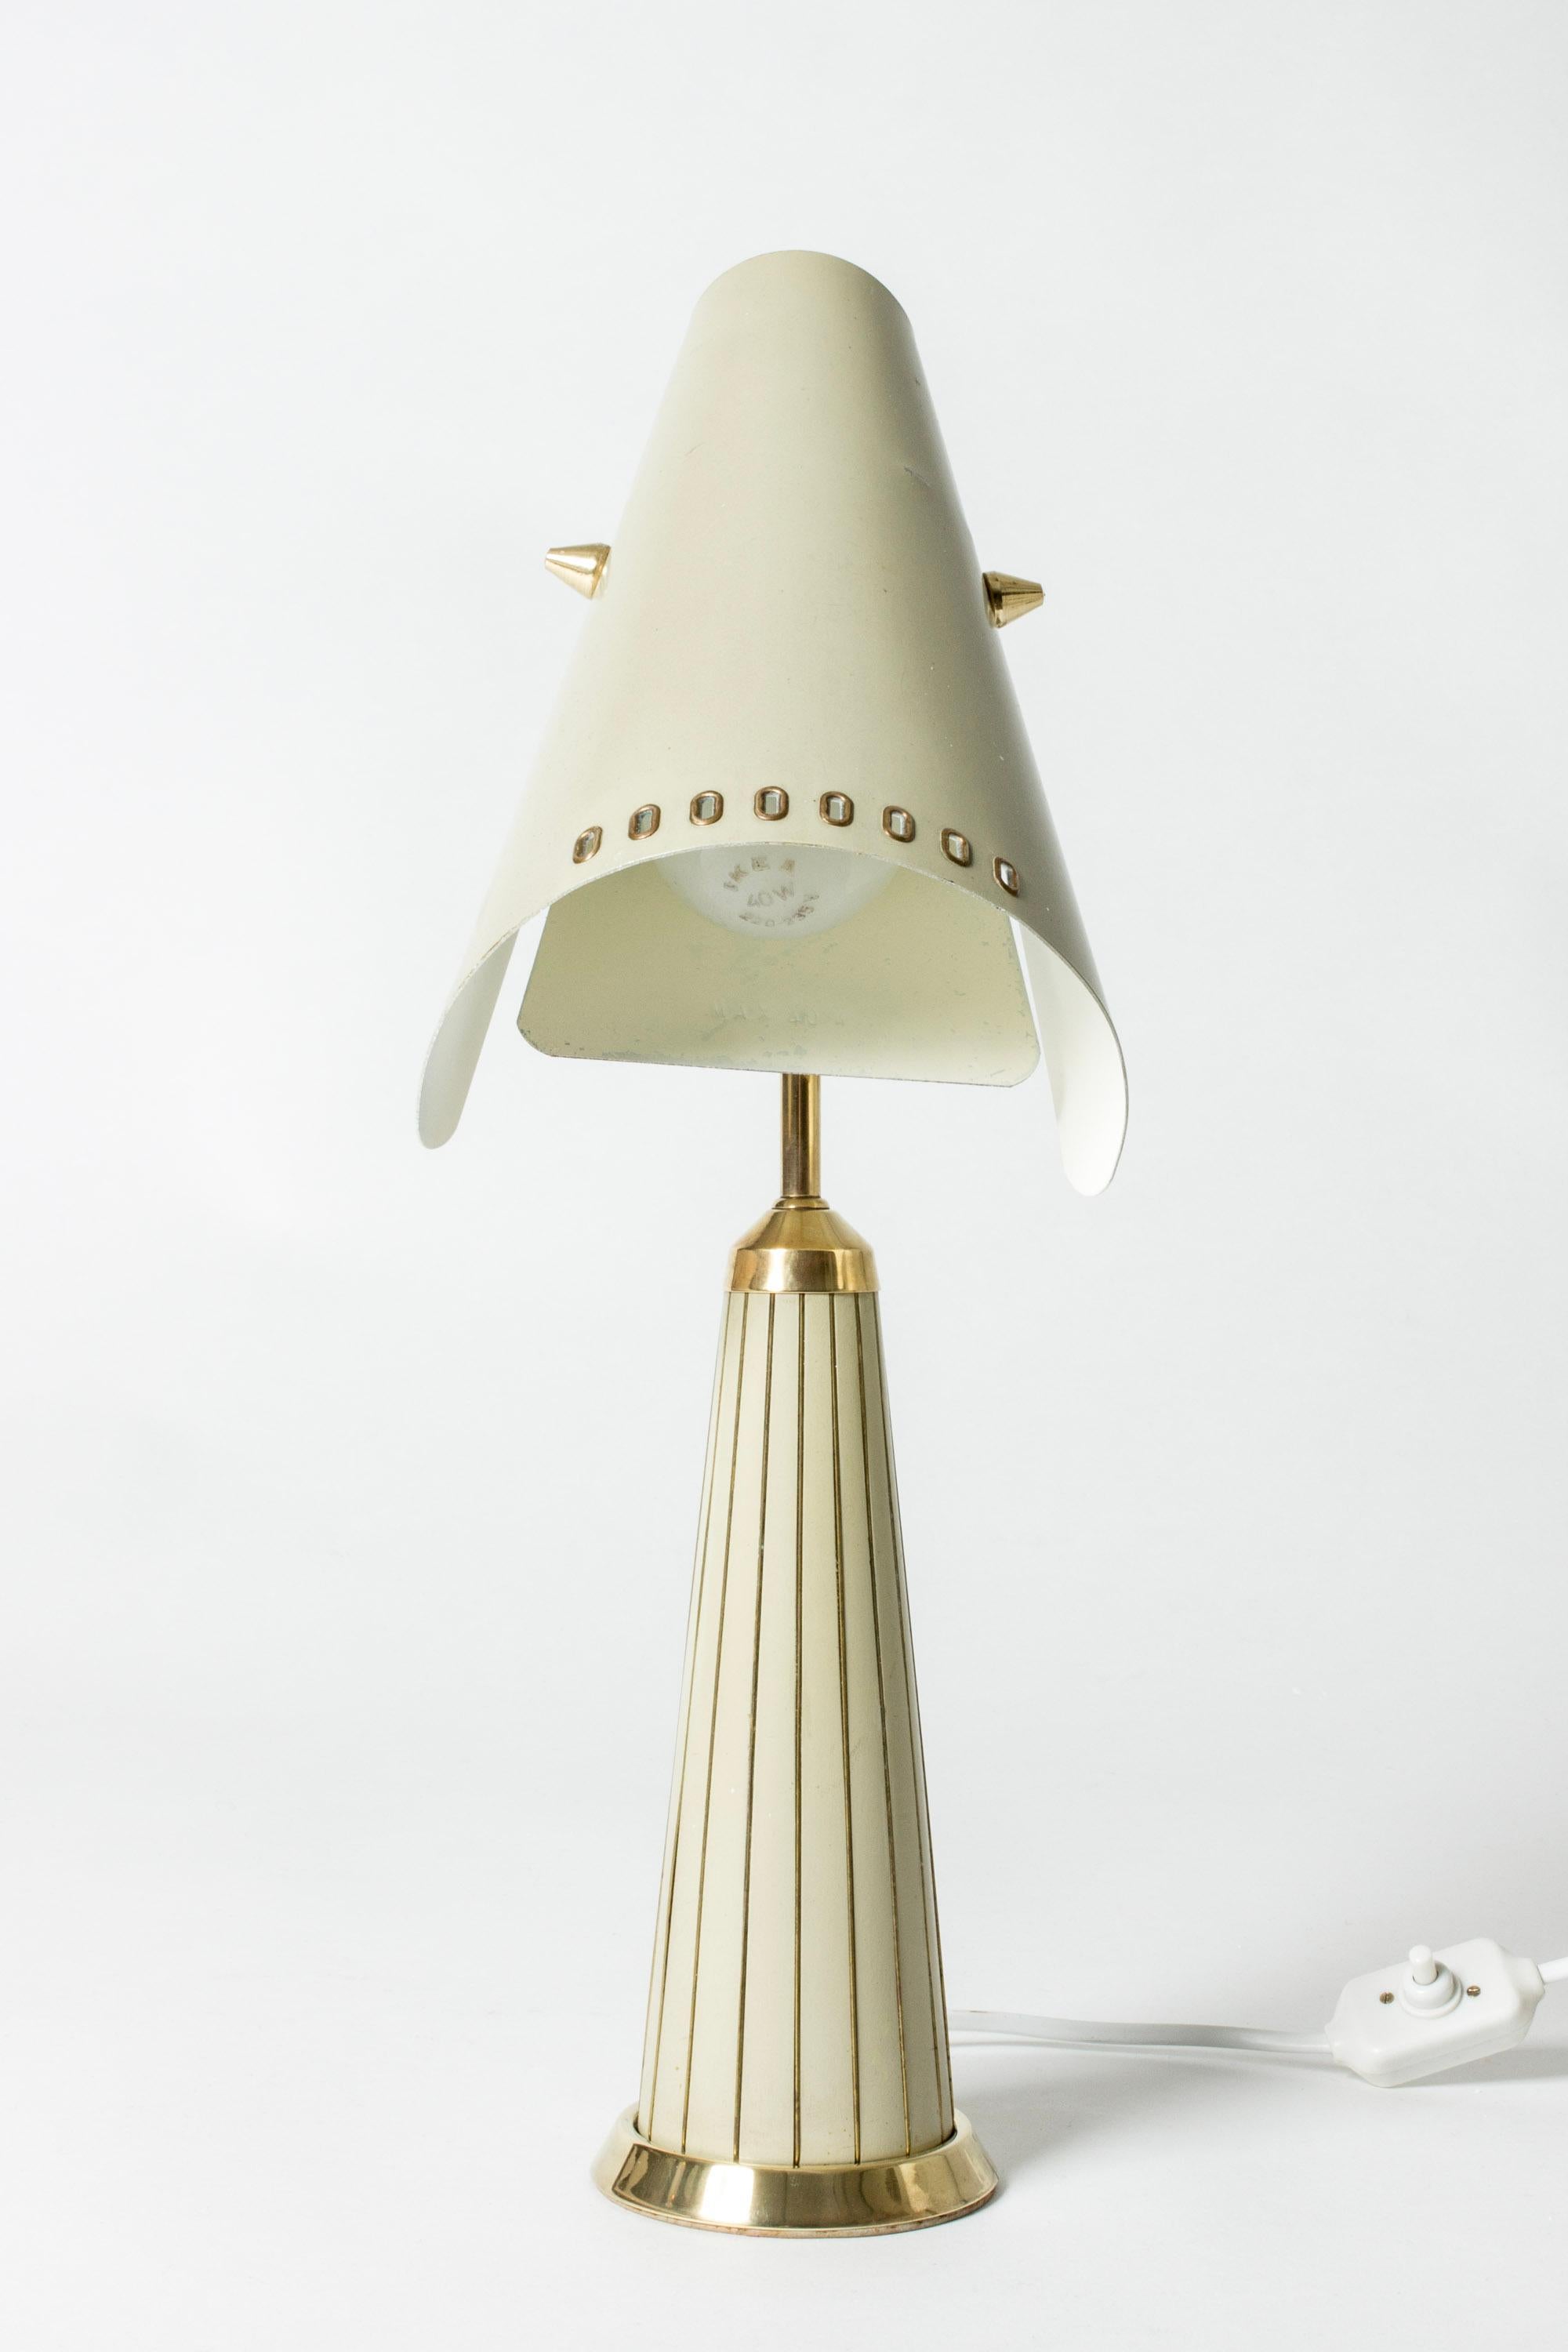 Very cool Swedish 1950s table lamp from Fåglavik, a small lighting firm in the south of Sweden. Fåglavik made small series of lighting with distinct artistic expressions. Made from cream lacquered metal with striking brass details.